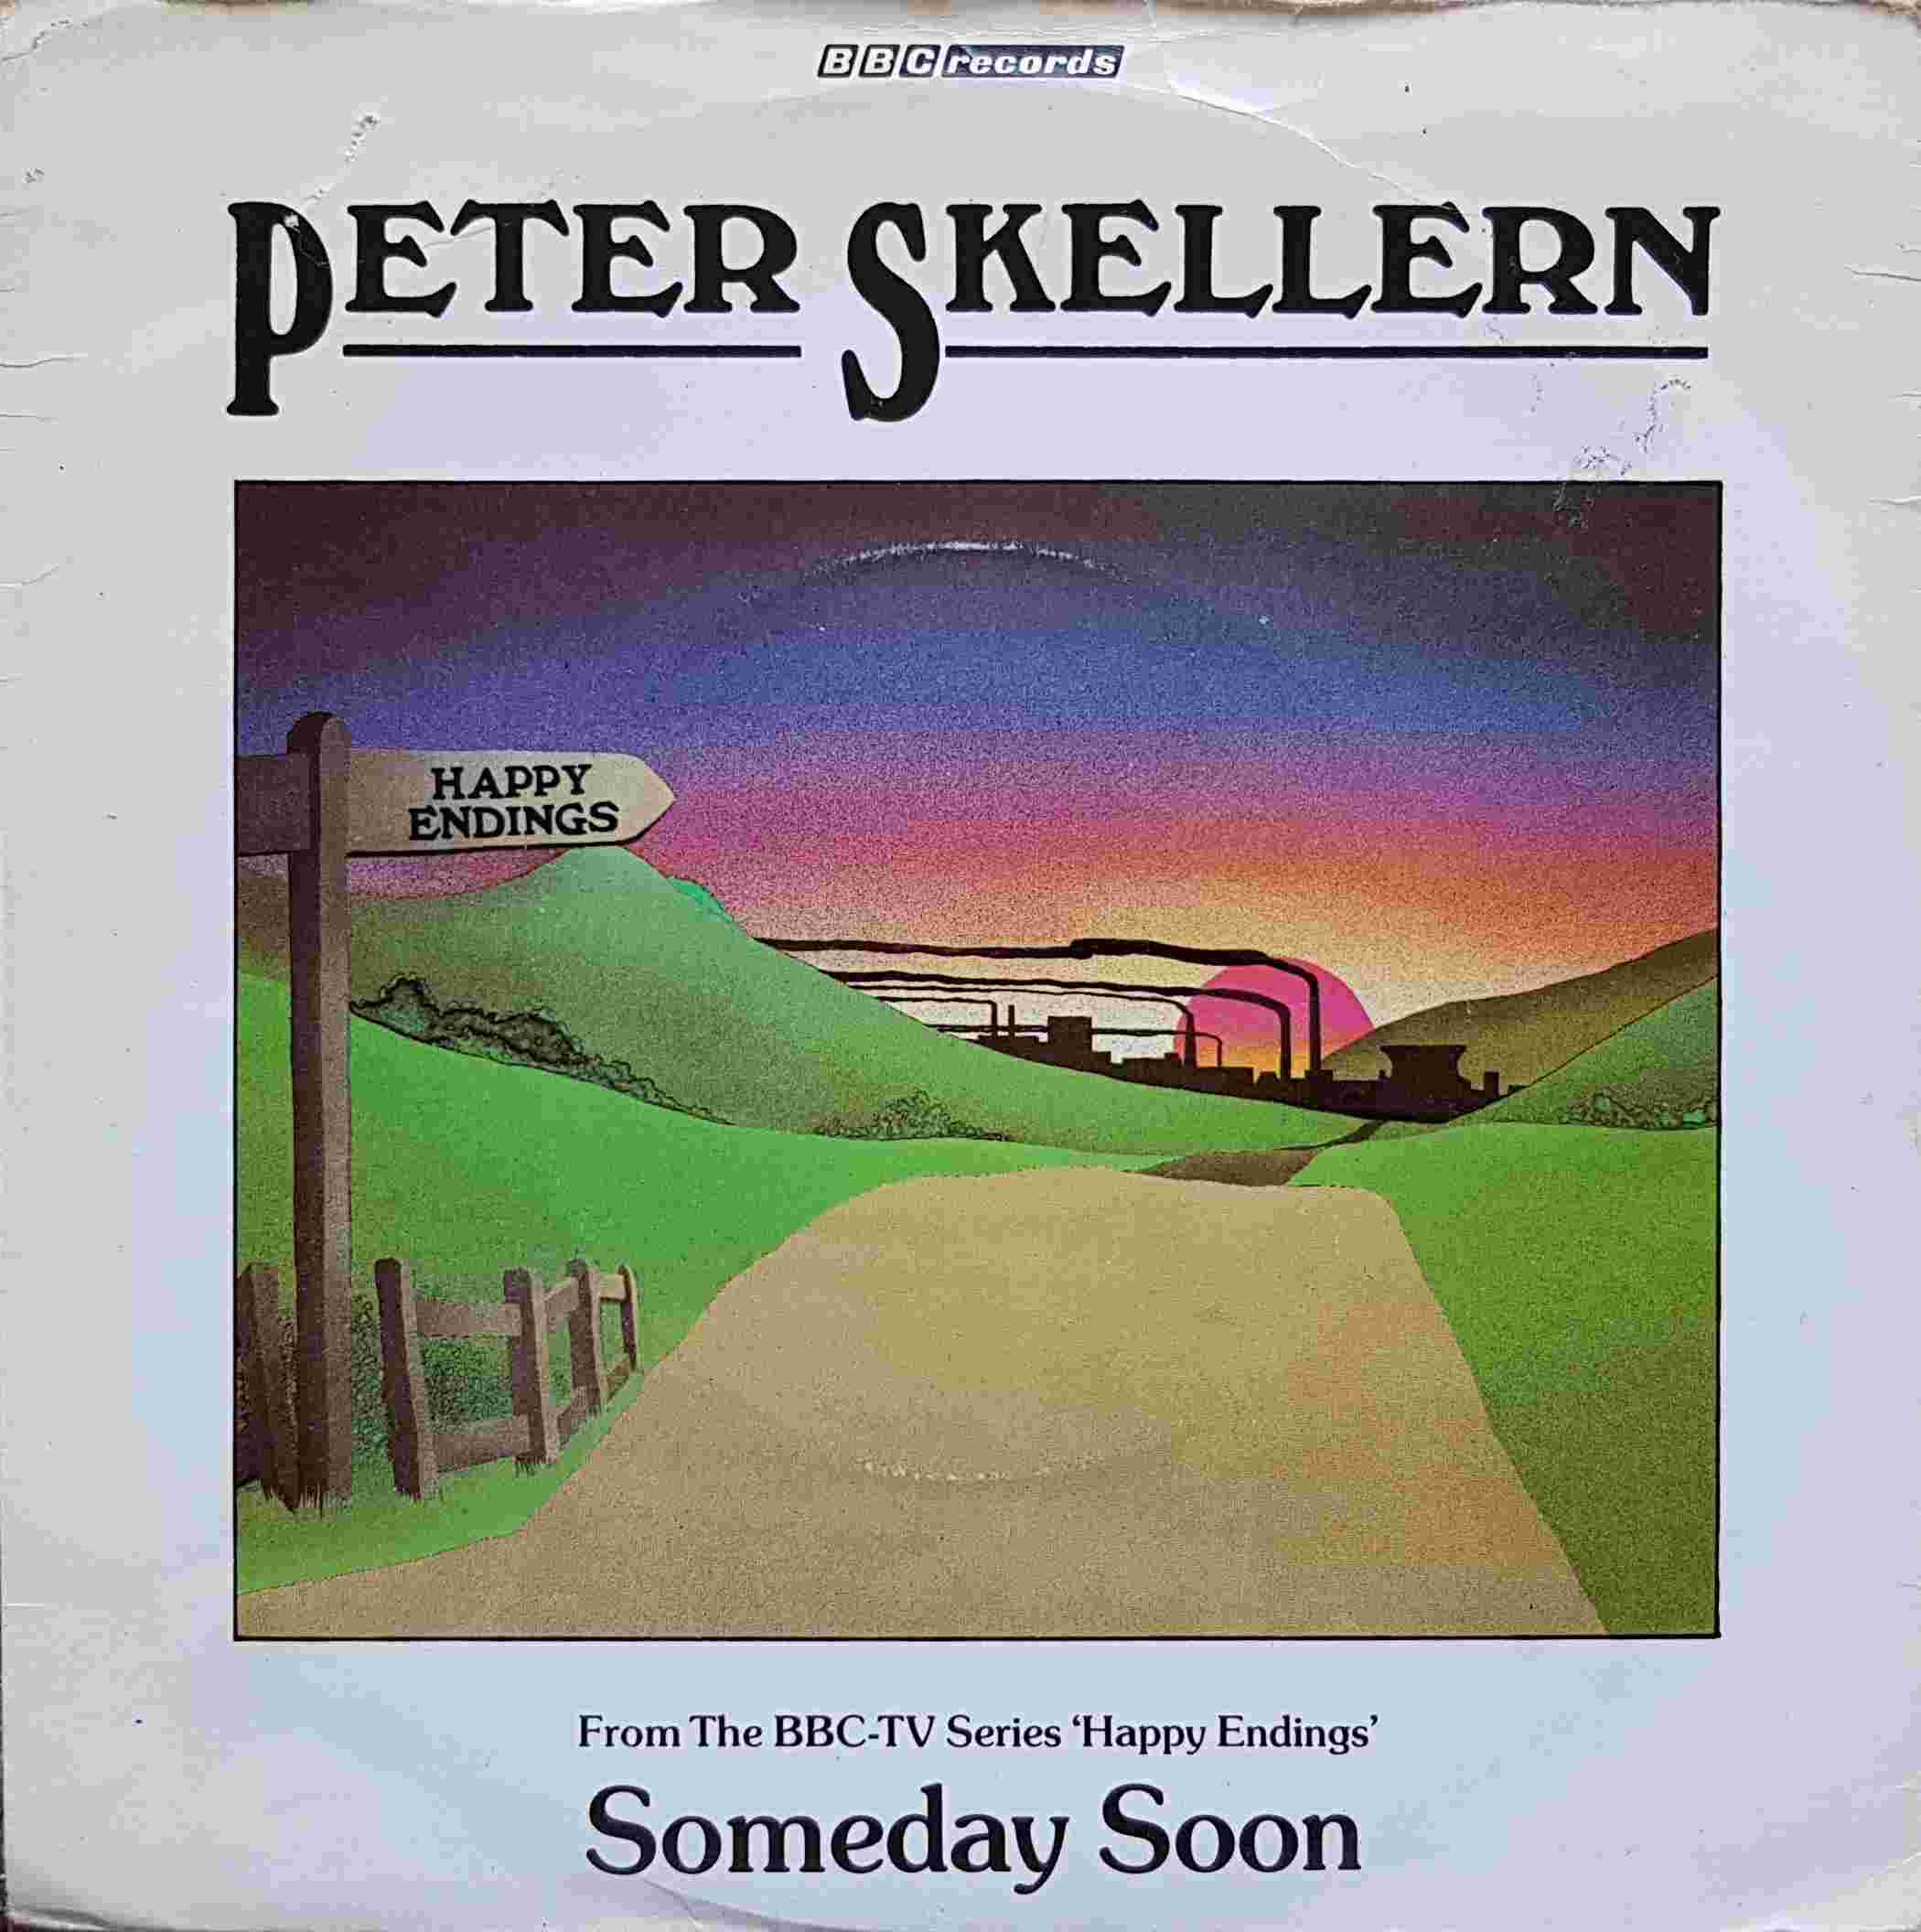 Picture of RESL 105 Someday soon (Happy endings) by artist Peter Skellern from the BBC records and Tapes library